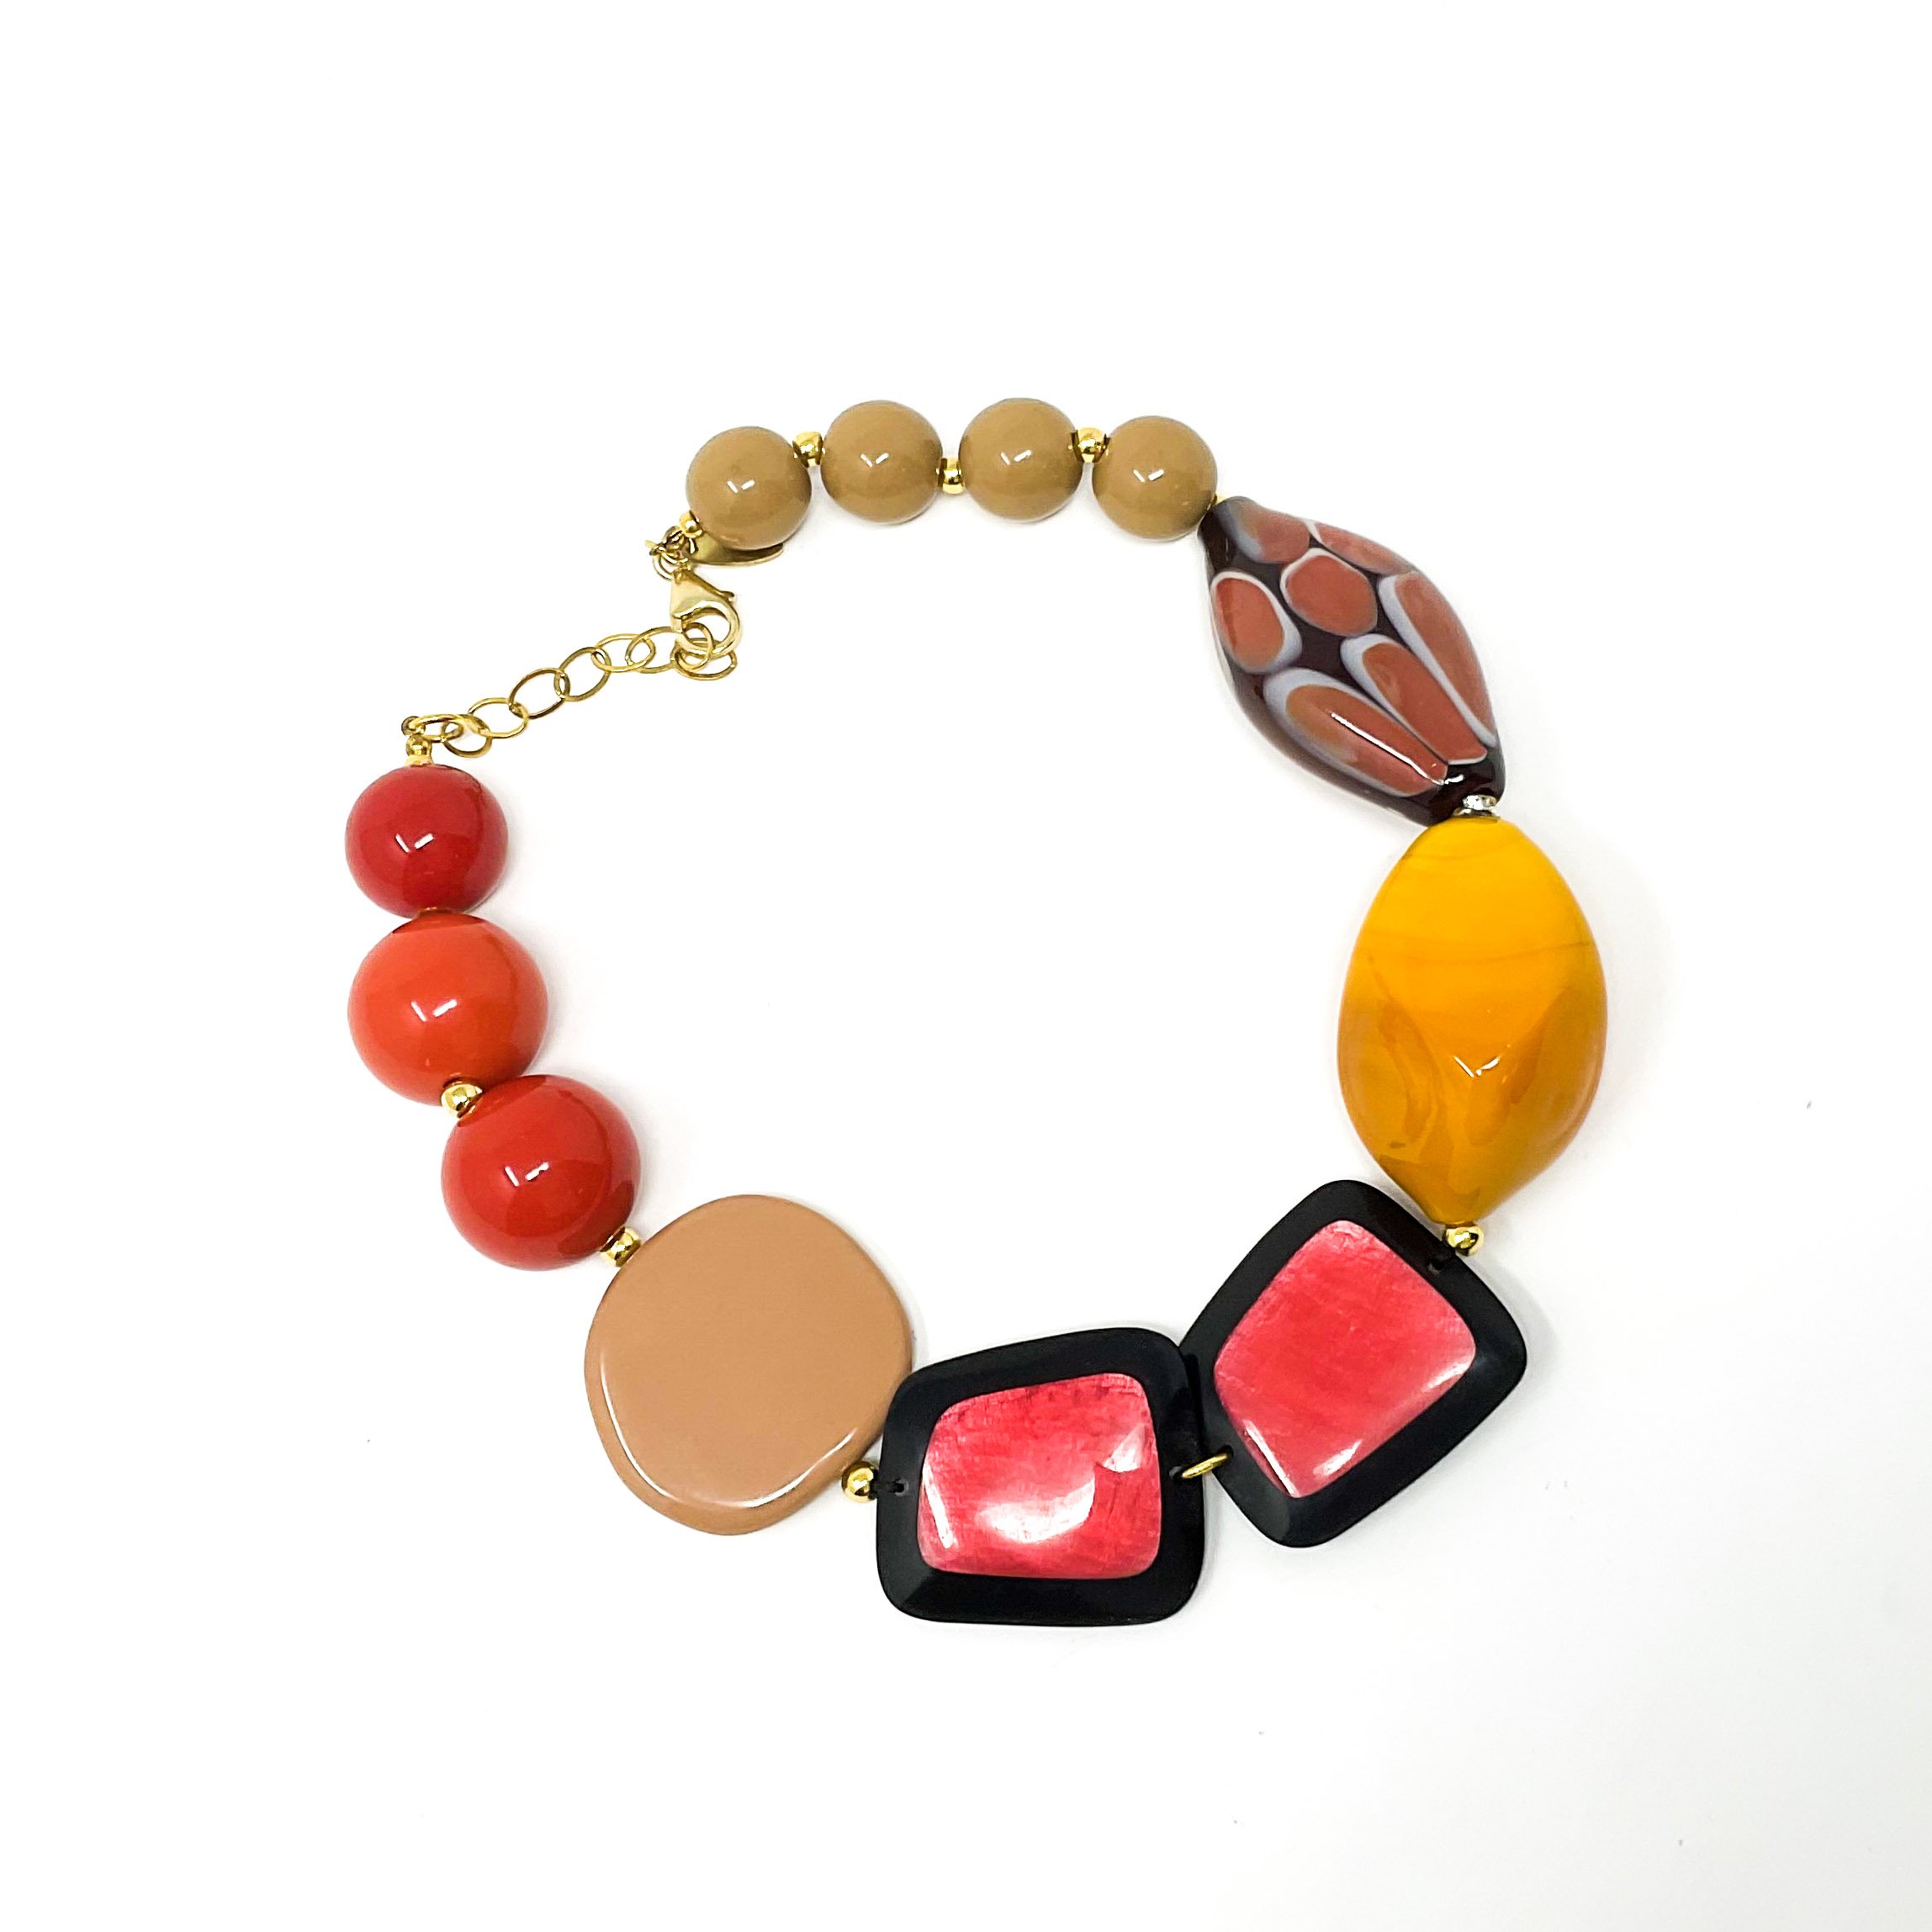 Buy Murano Glass Bracelet, With 11x11mm Flat Foil, Venetian Bead Cubes With  Swirls of Colors, Available in Gold or Silver, Adjustable Online in India -  Etsy